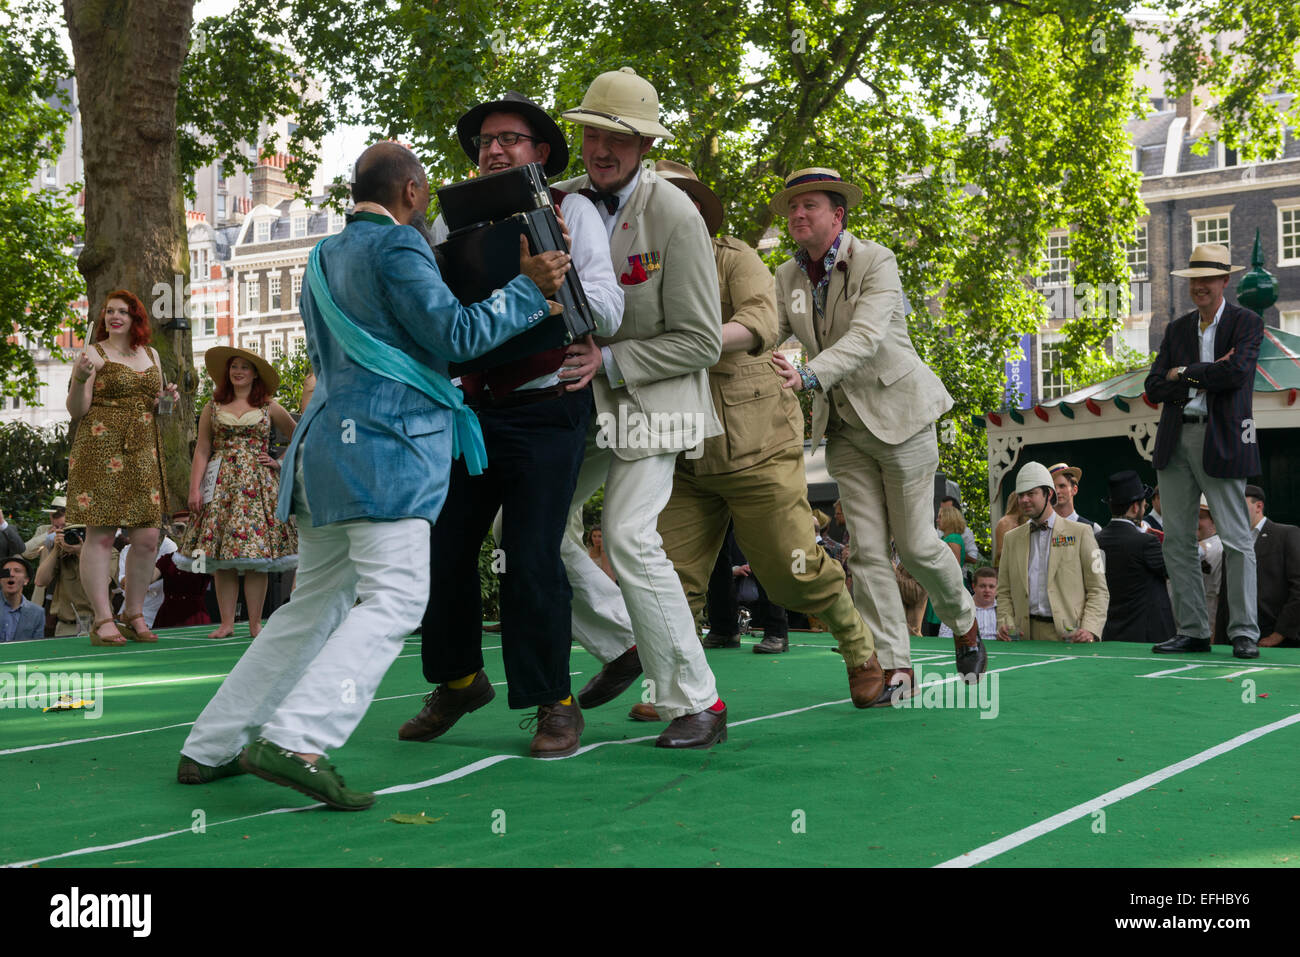 The 10 Anniversary of the Chap Olympiad. A sartorial gathering of chaps and chapesses in Bloomsbury London. Various Chap sports are held at a picnic in the square. This event is the Briefcase Phalanx: a fight with briefcases, London, England Stock Photo